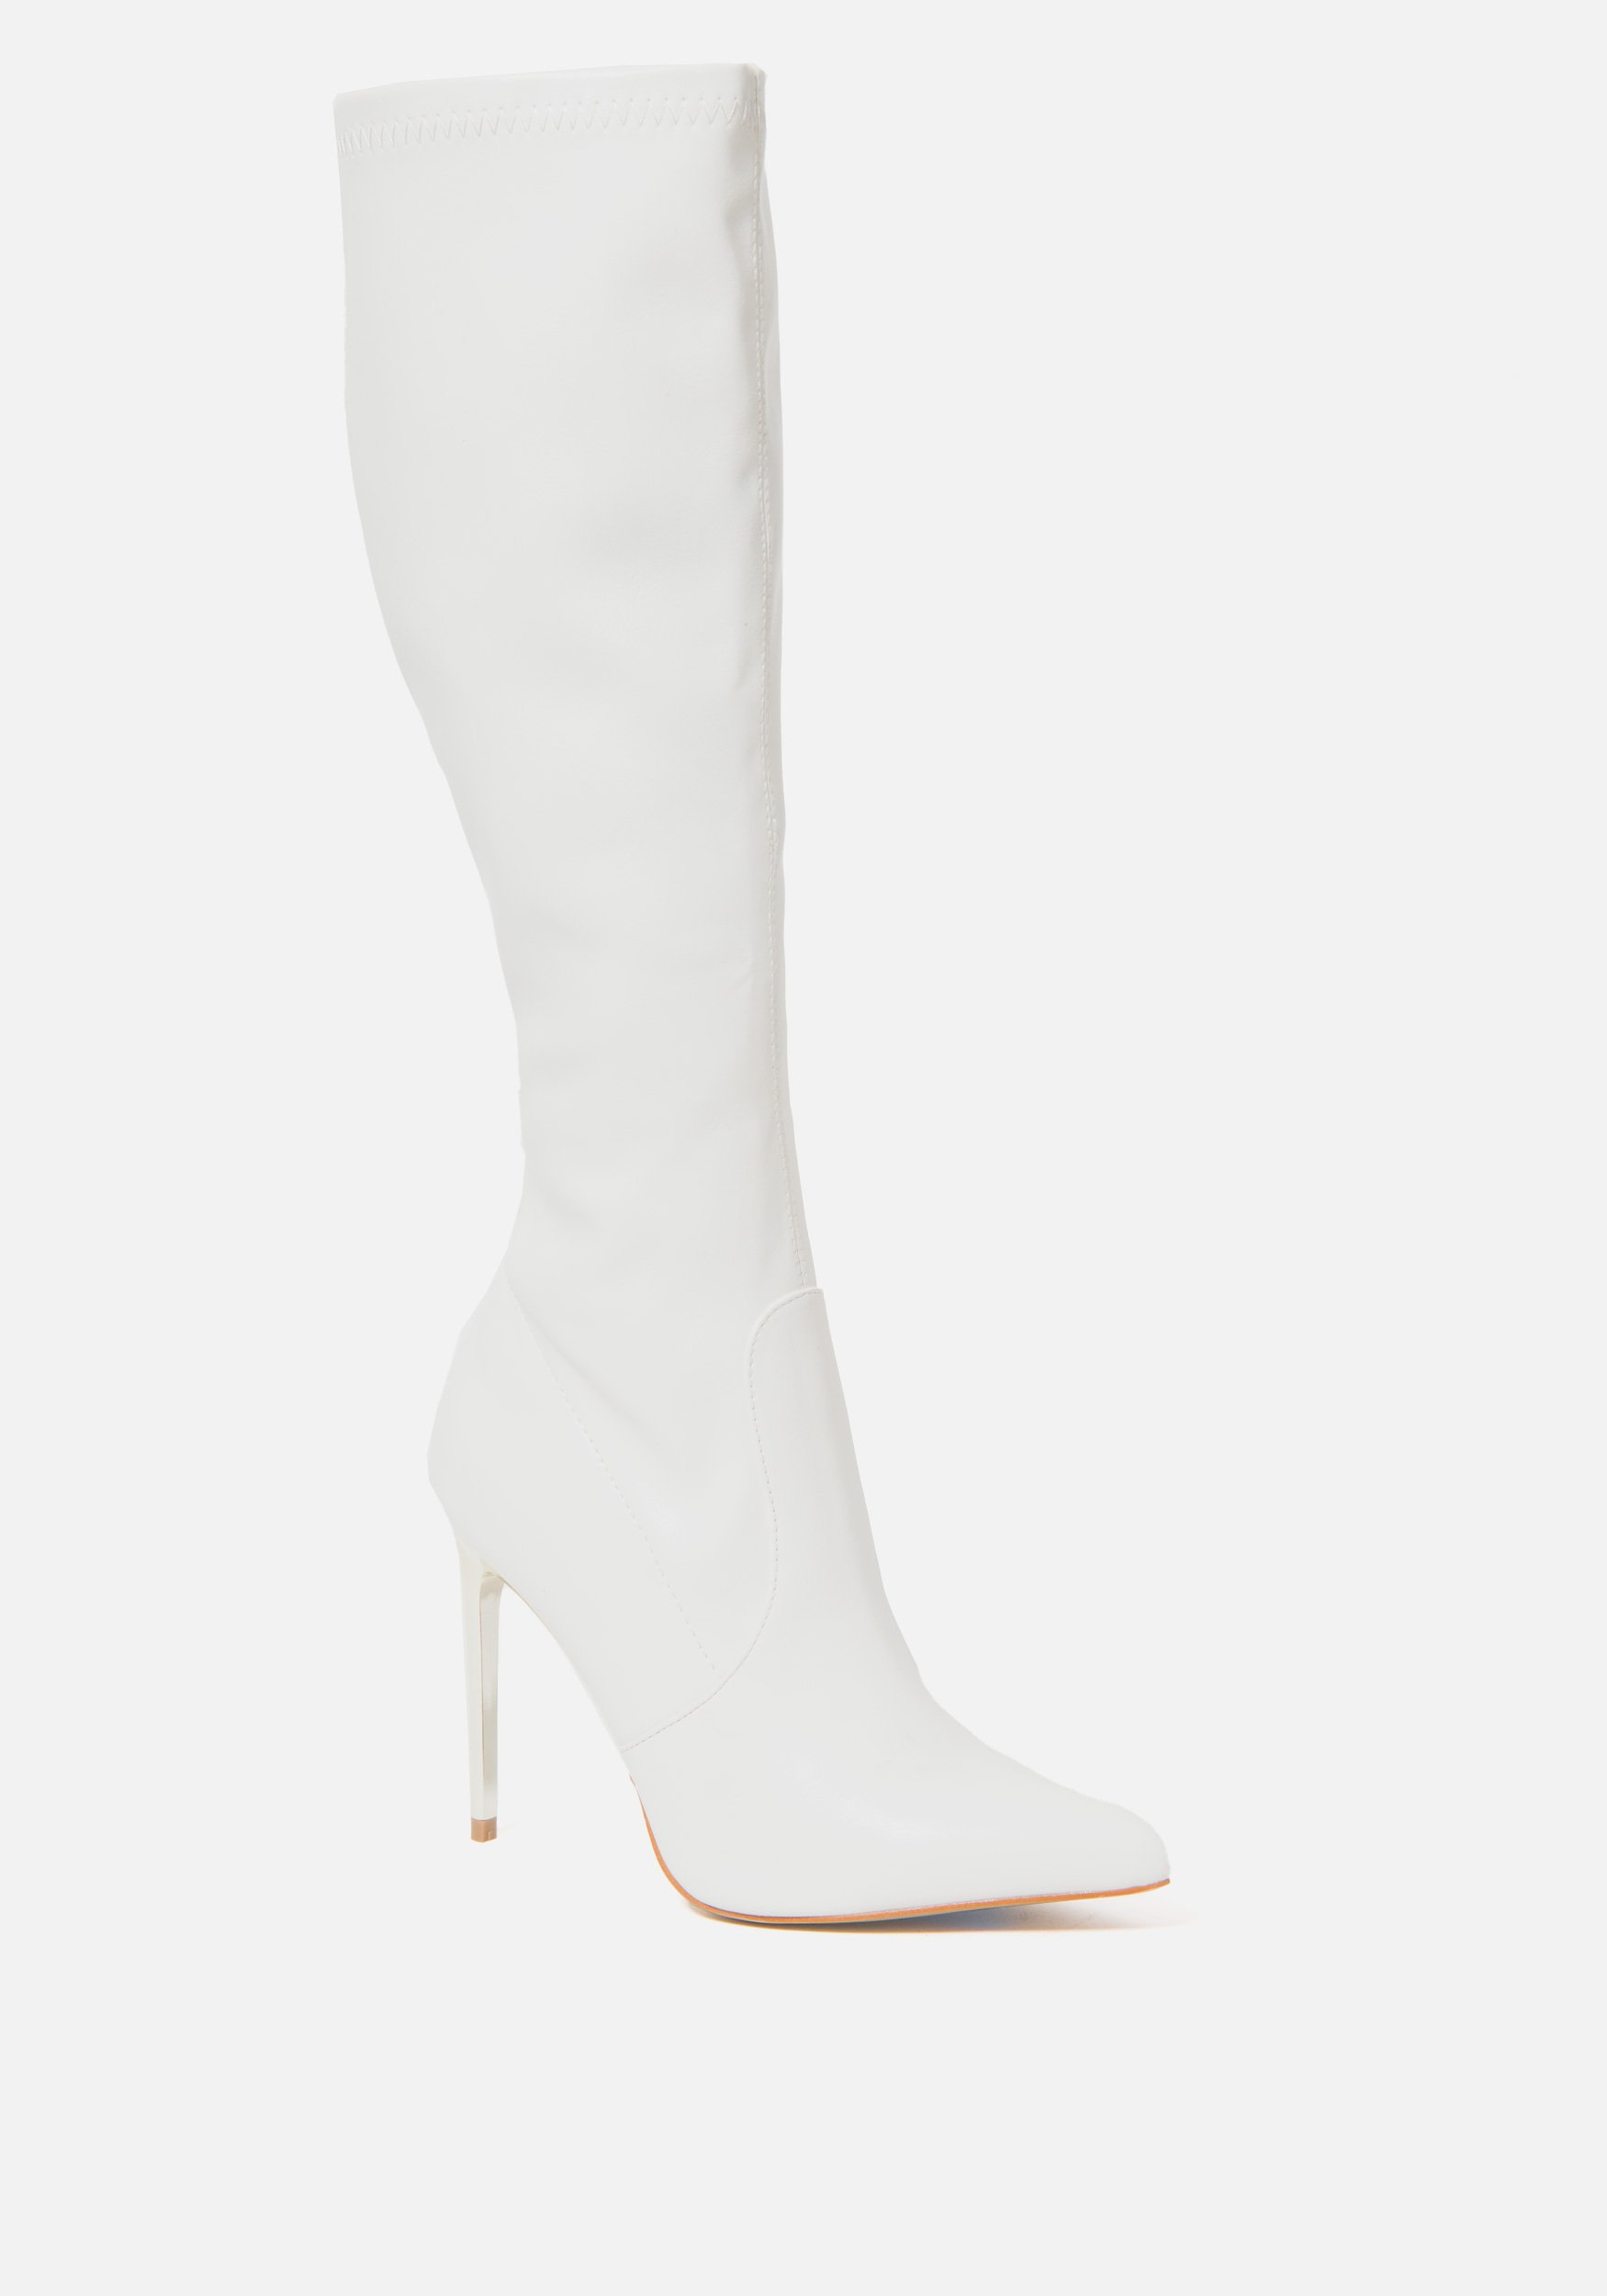 Bebe Women's Valeria Knee High Boots, Size 9.5 in WINTER WHITE Synthetic